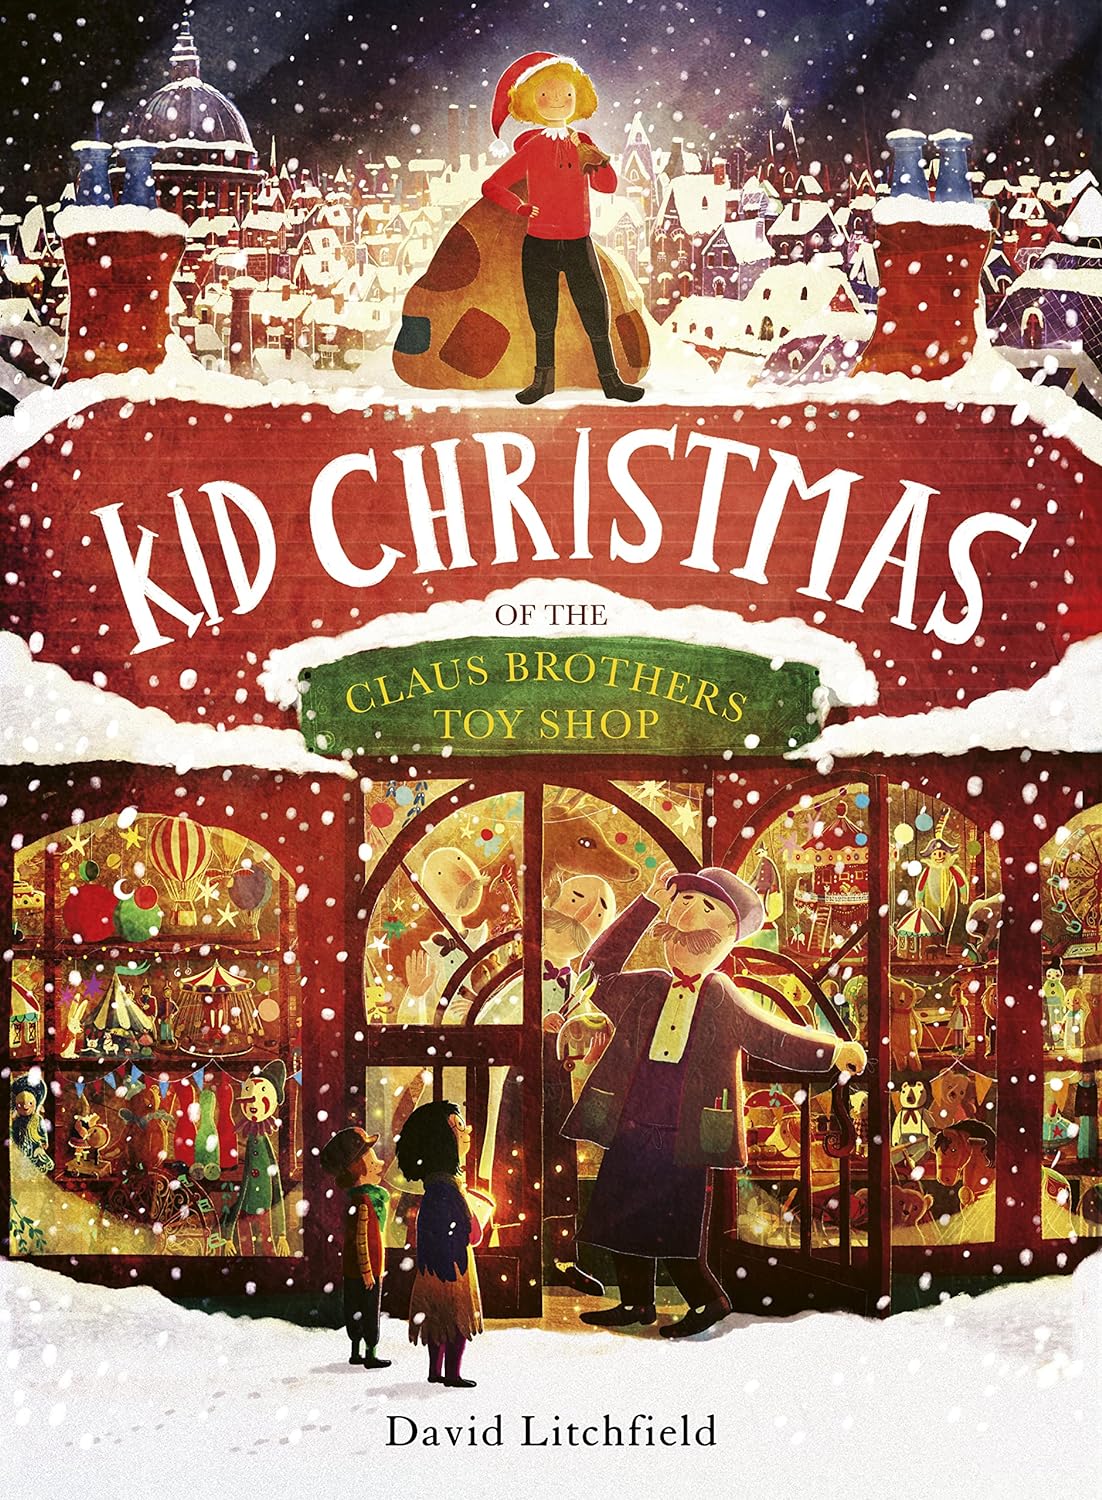 Kid Christmas: of the Claus Brothers Toy Store